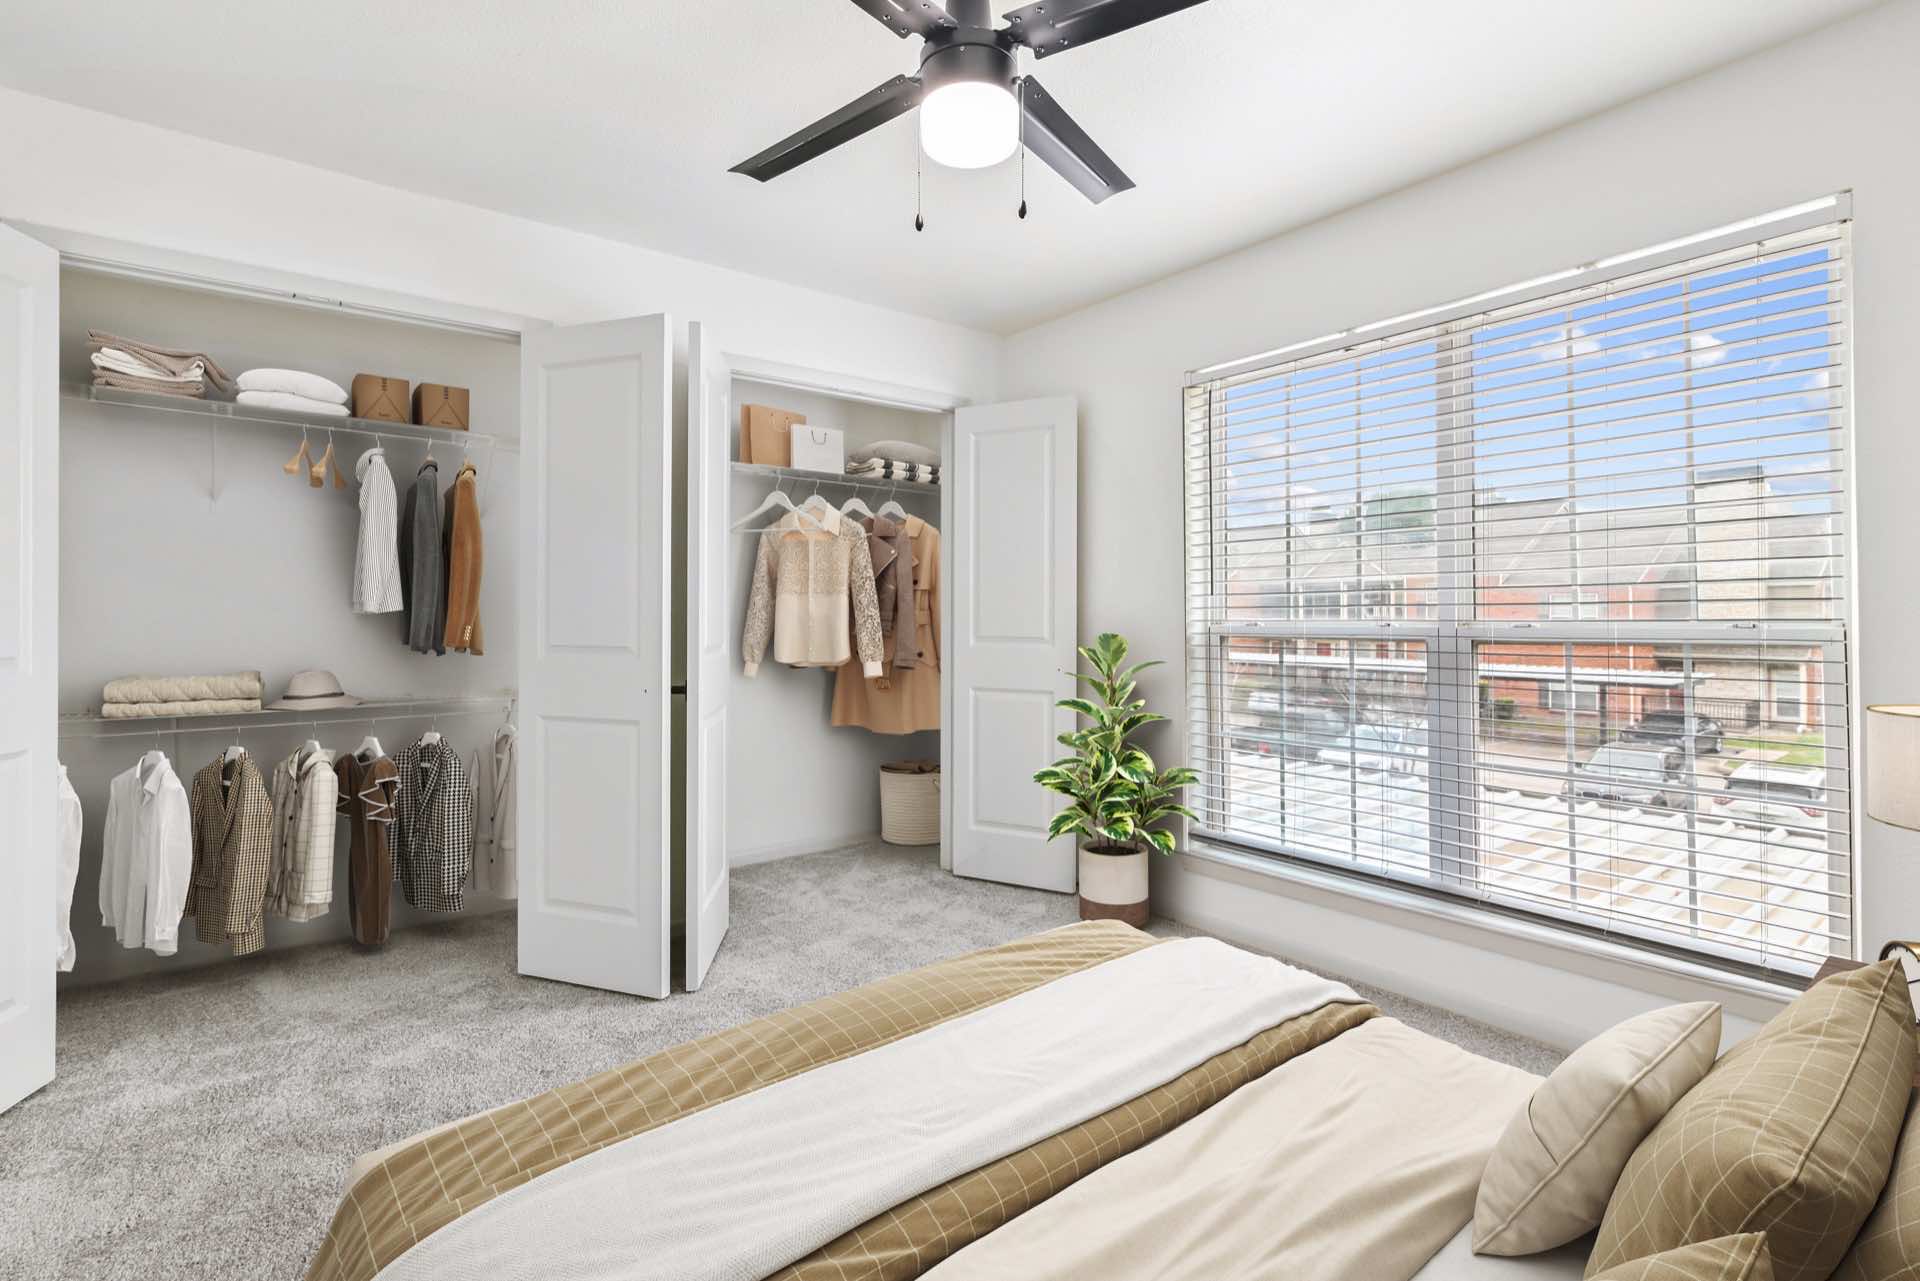 bedroom with large window, ceiling fan, and two reach-in closets